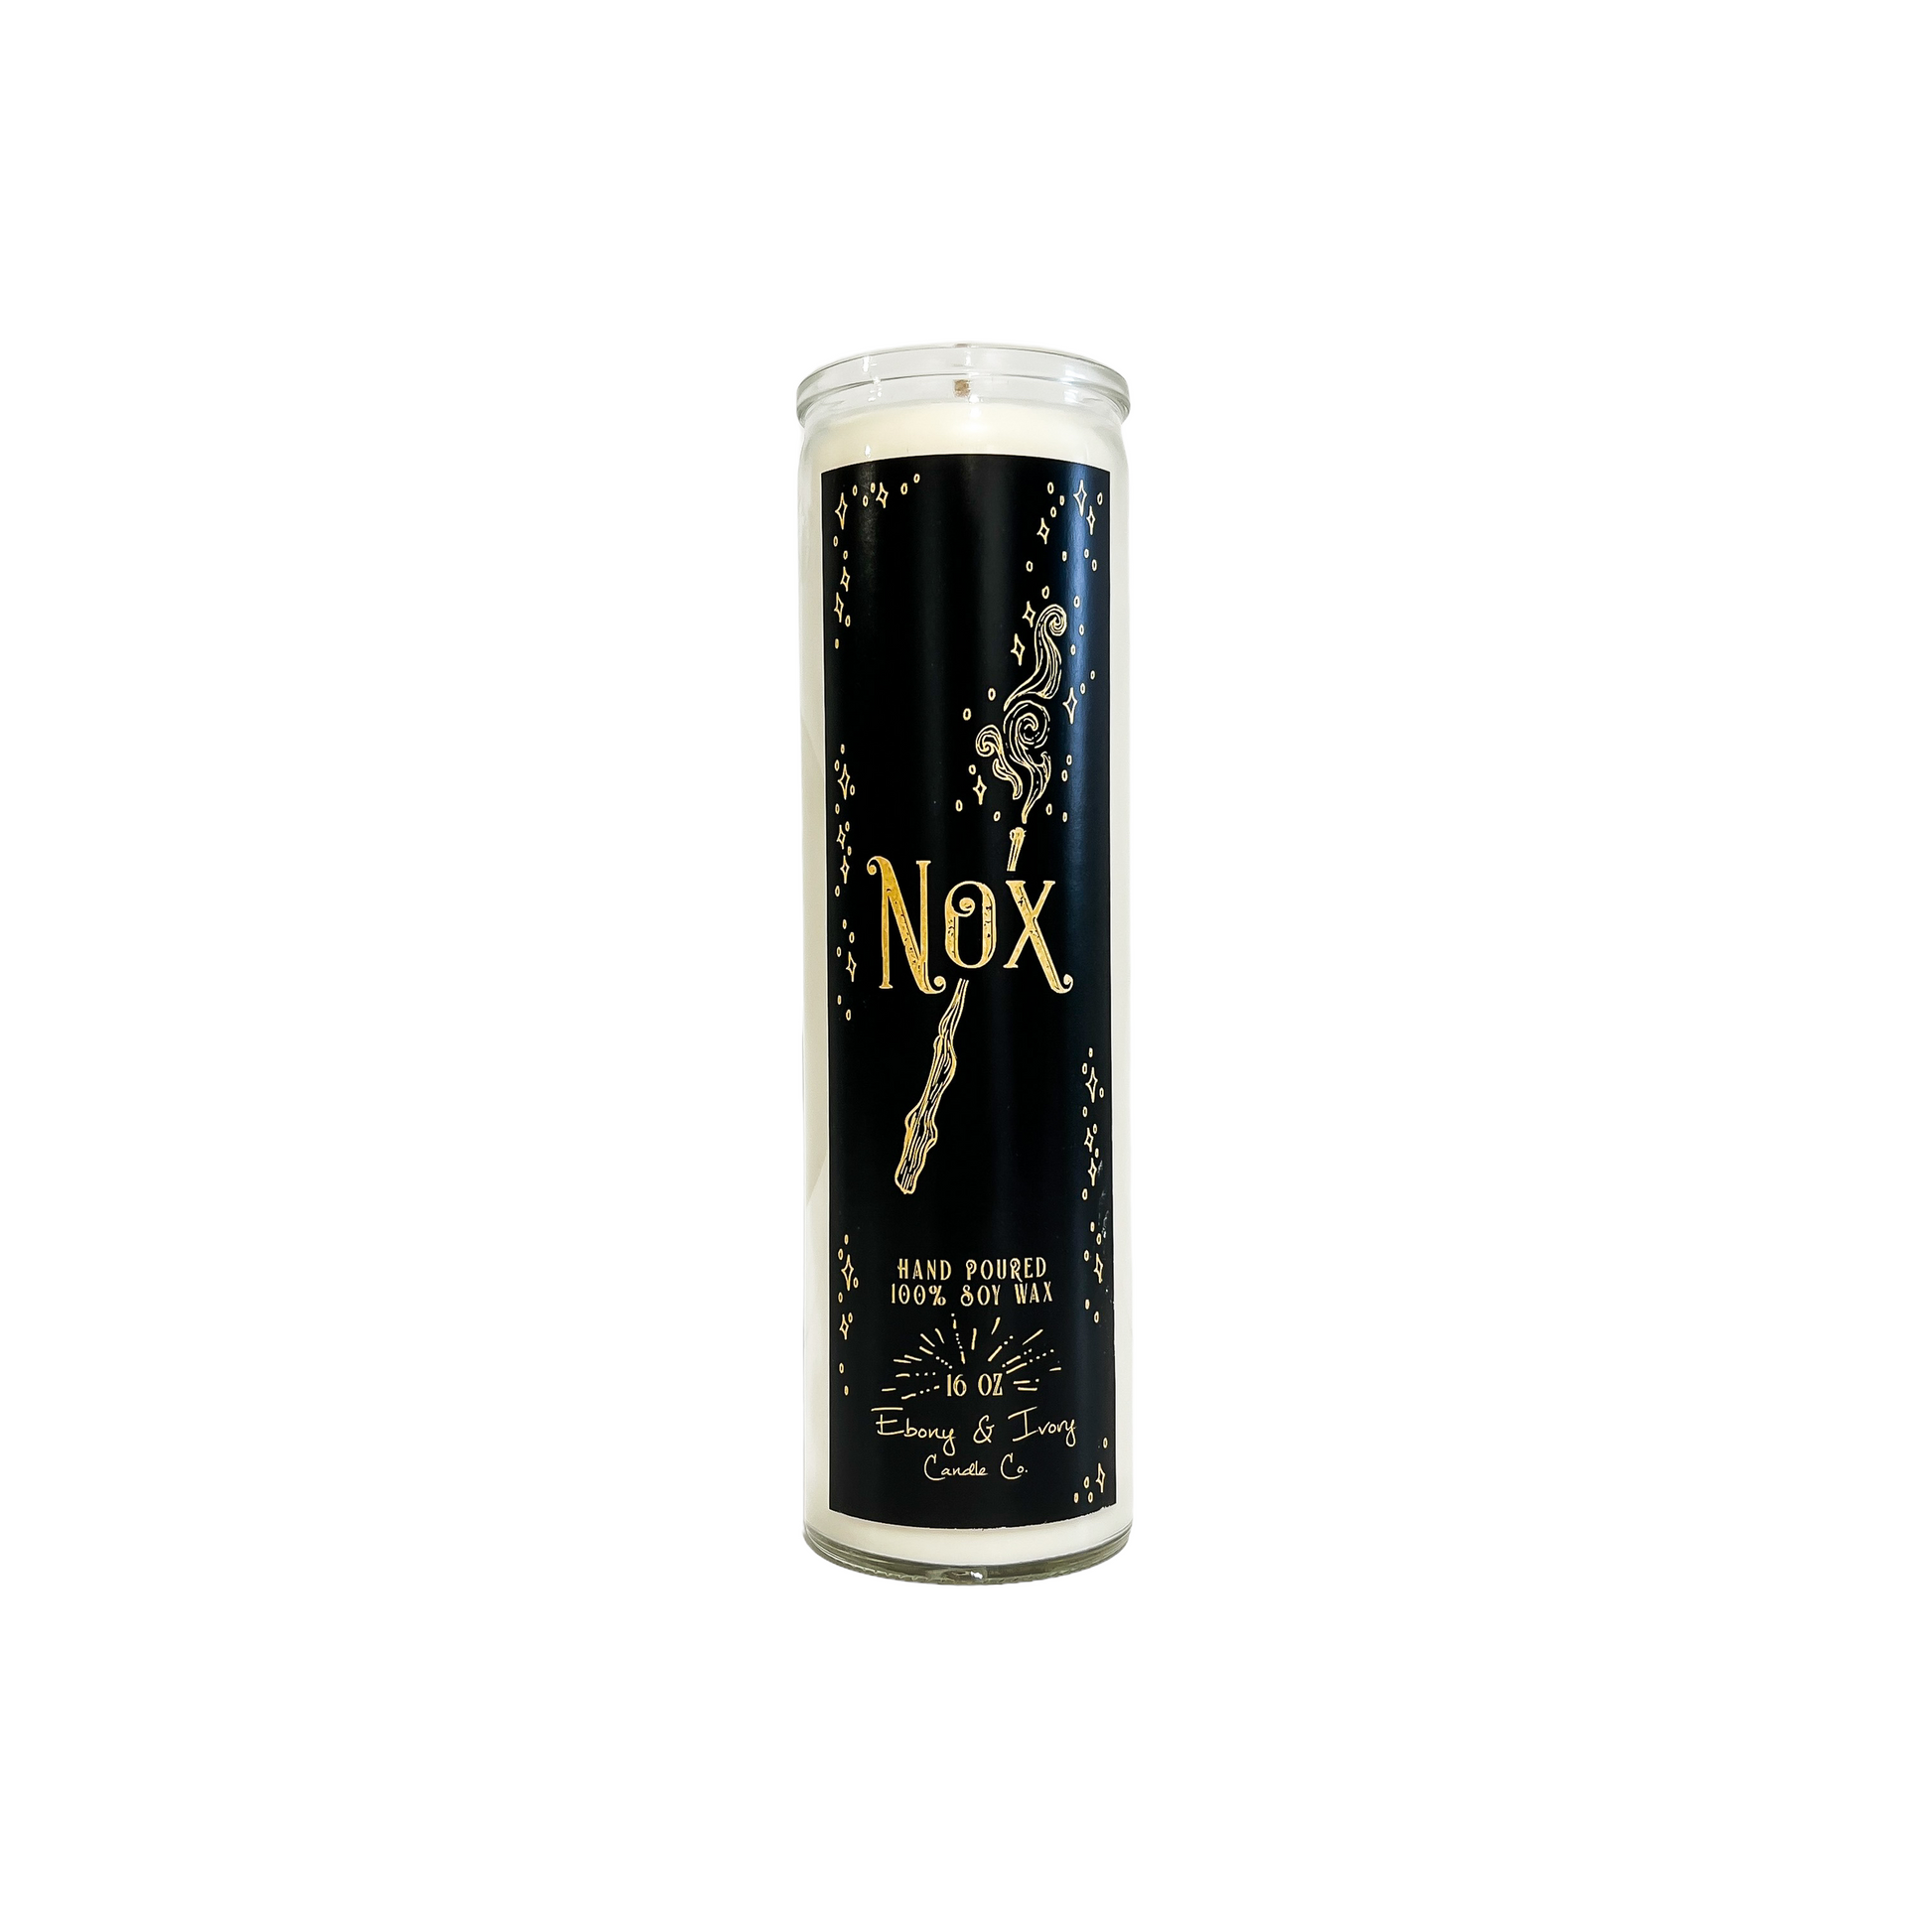 Tall, clear glass, peppermint and eucalyptus scented soy wax candle with a black label and gold text that reads Nox